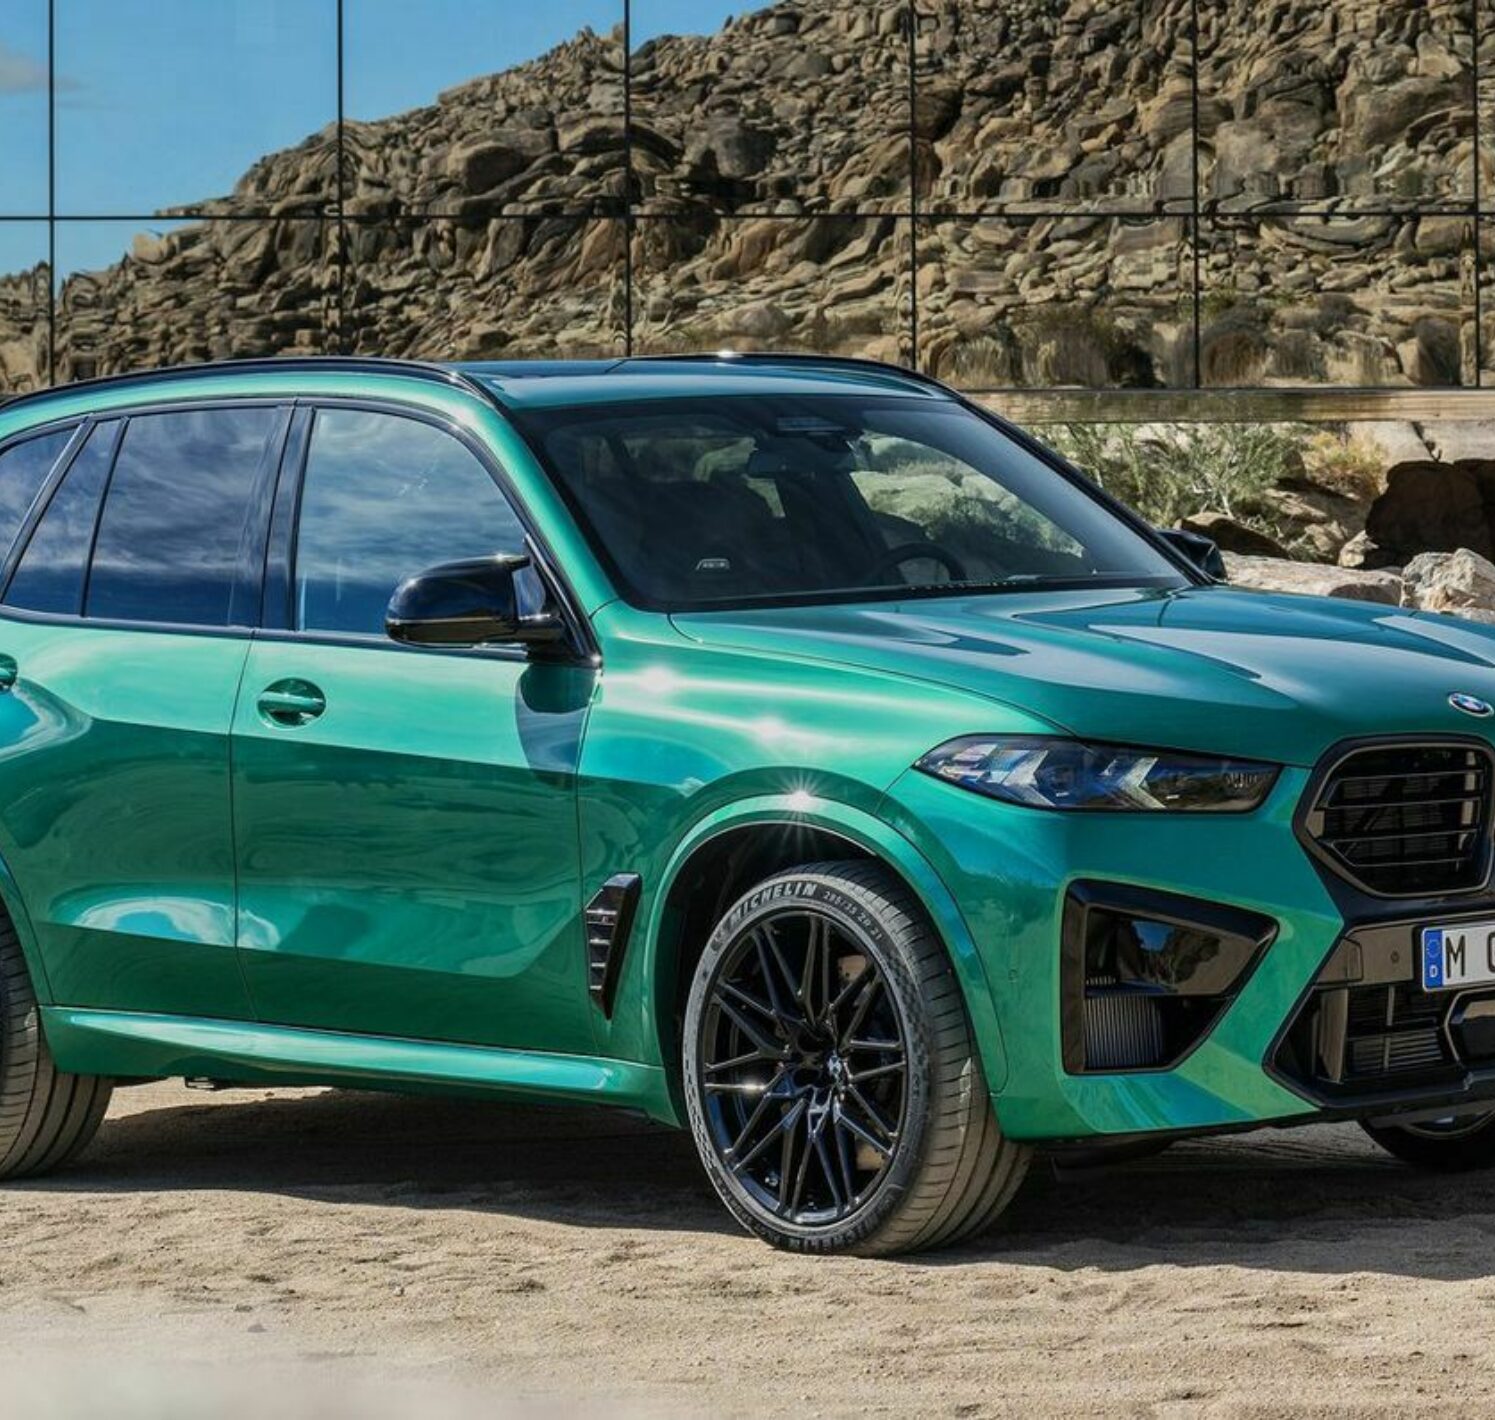 https://autofilter.sk/assets/images/x5/gallery/bmw-x5-m-competition-8-galeria.jpg - obrazok